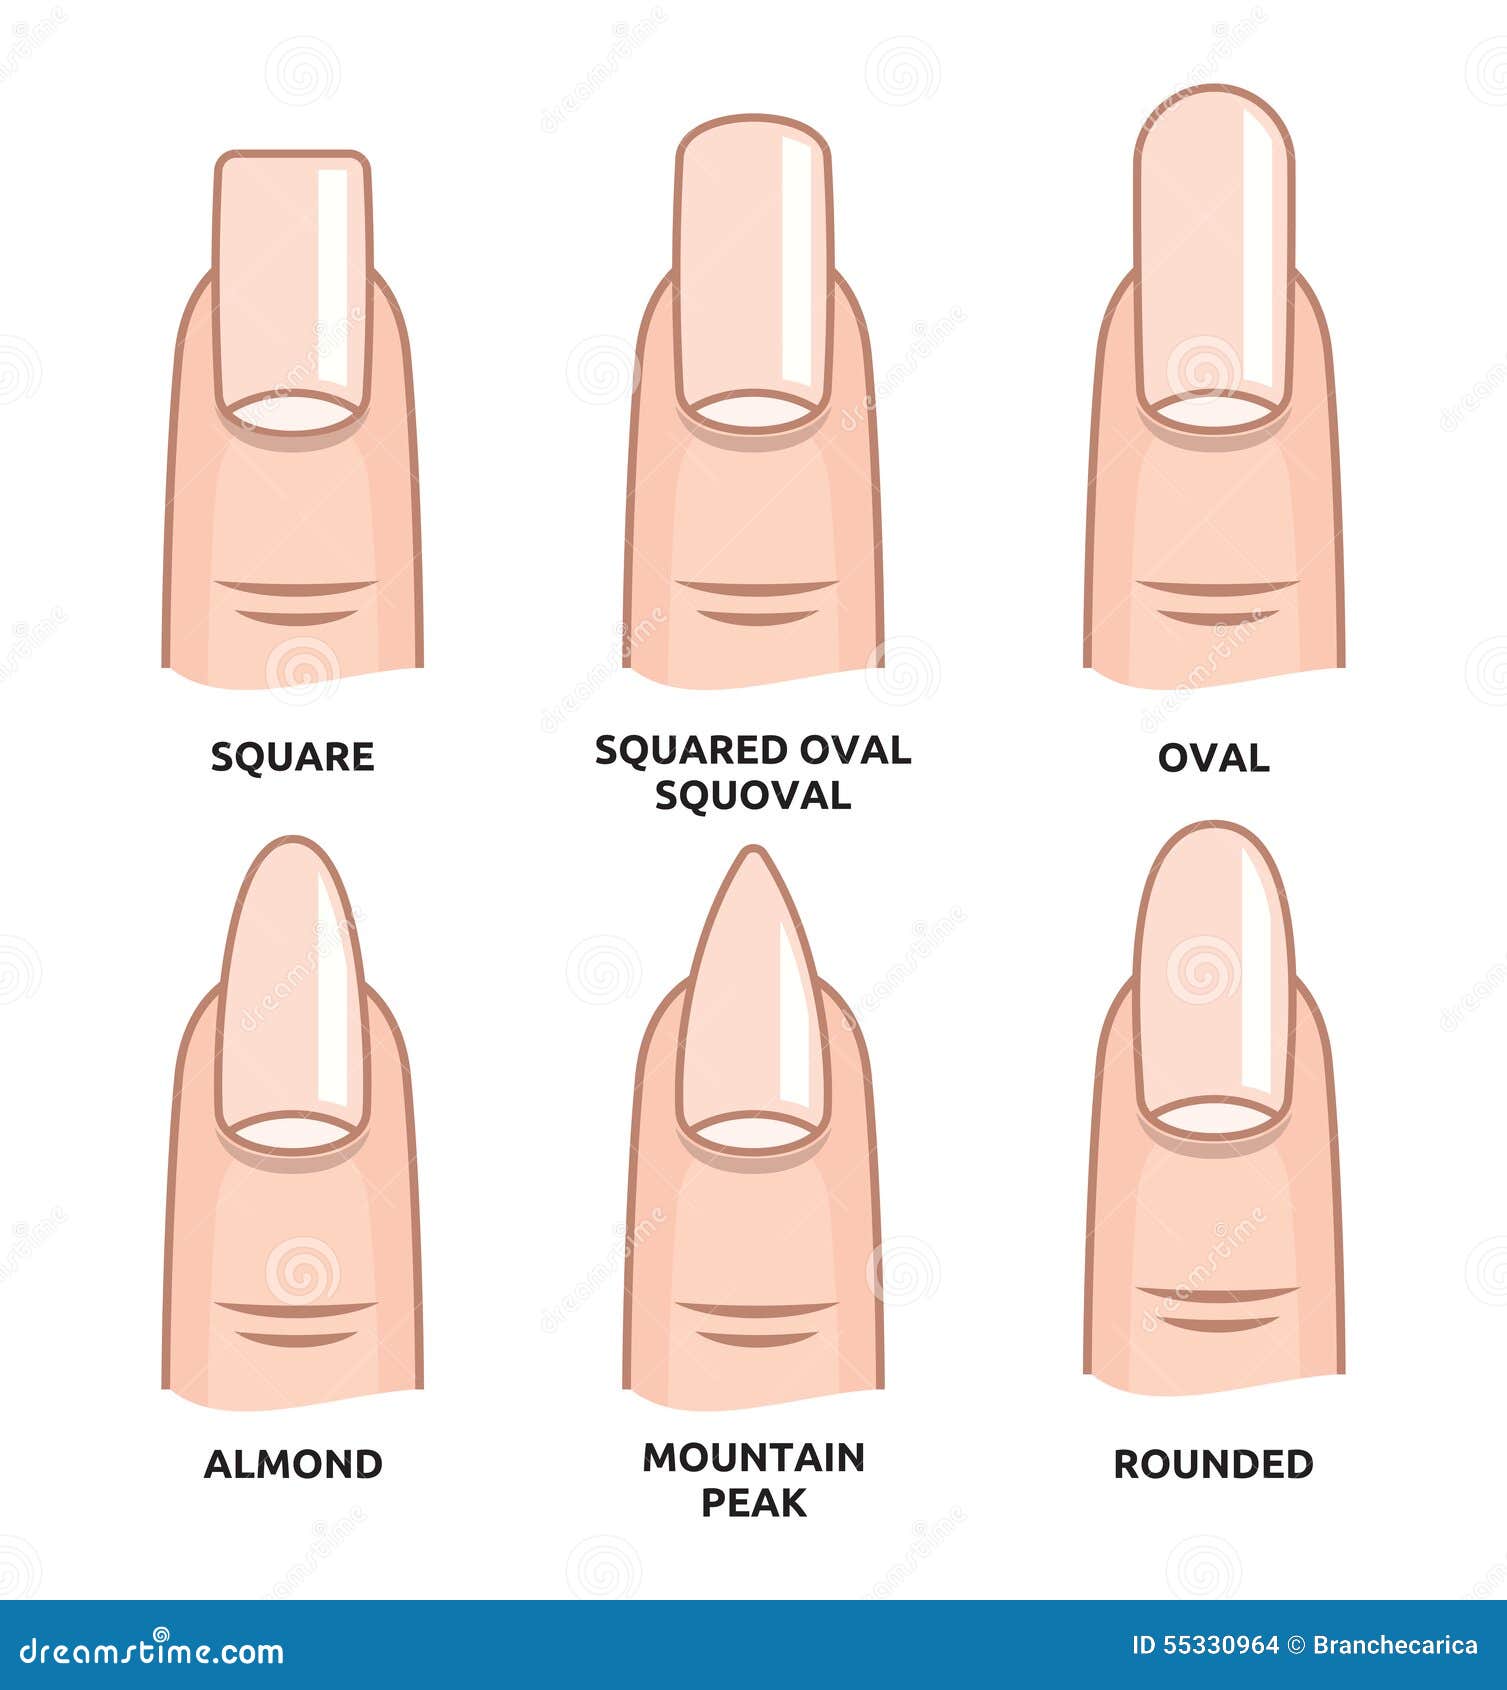 The Ultimate Guide to 12 Different Nail Shapes